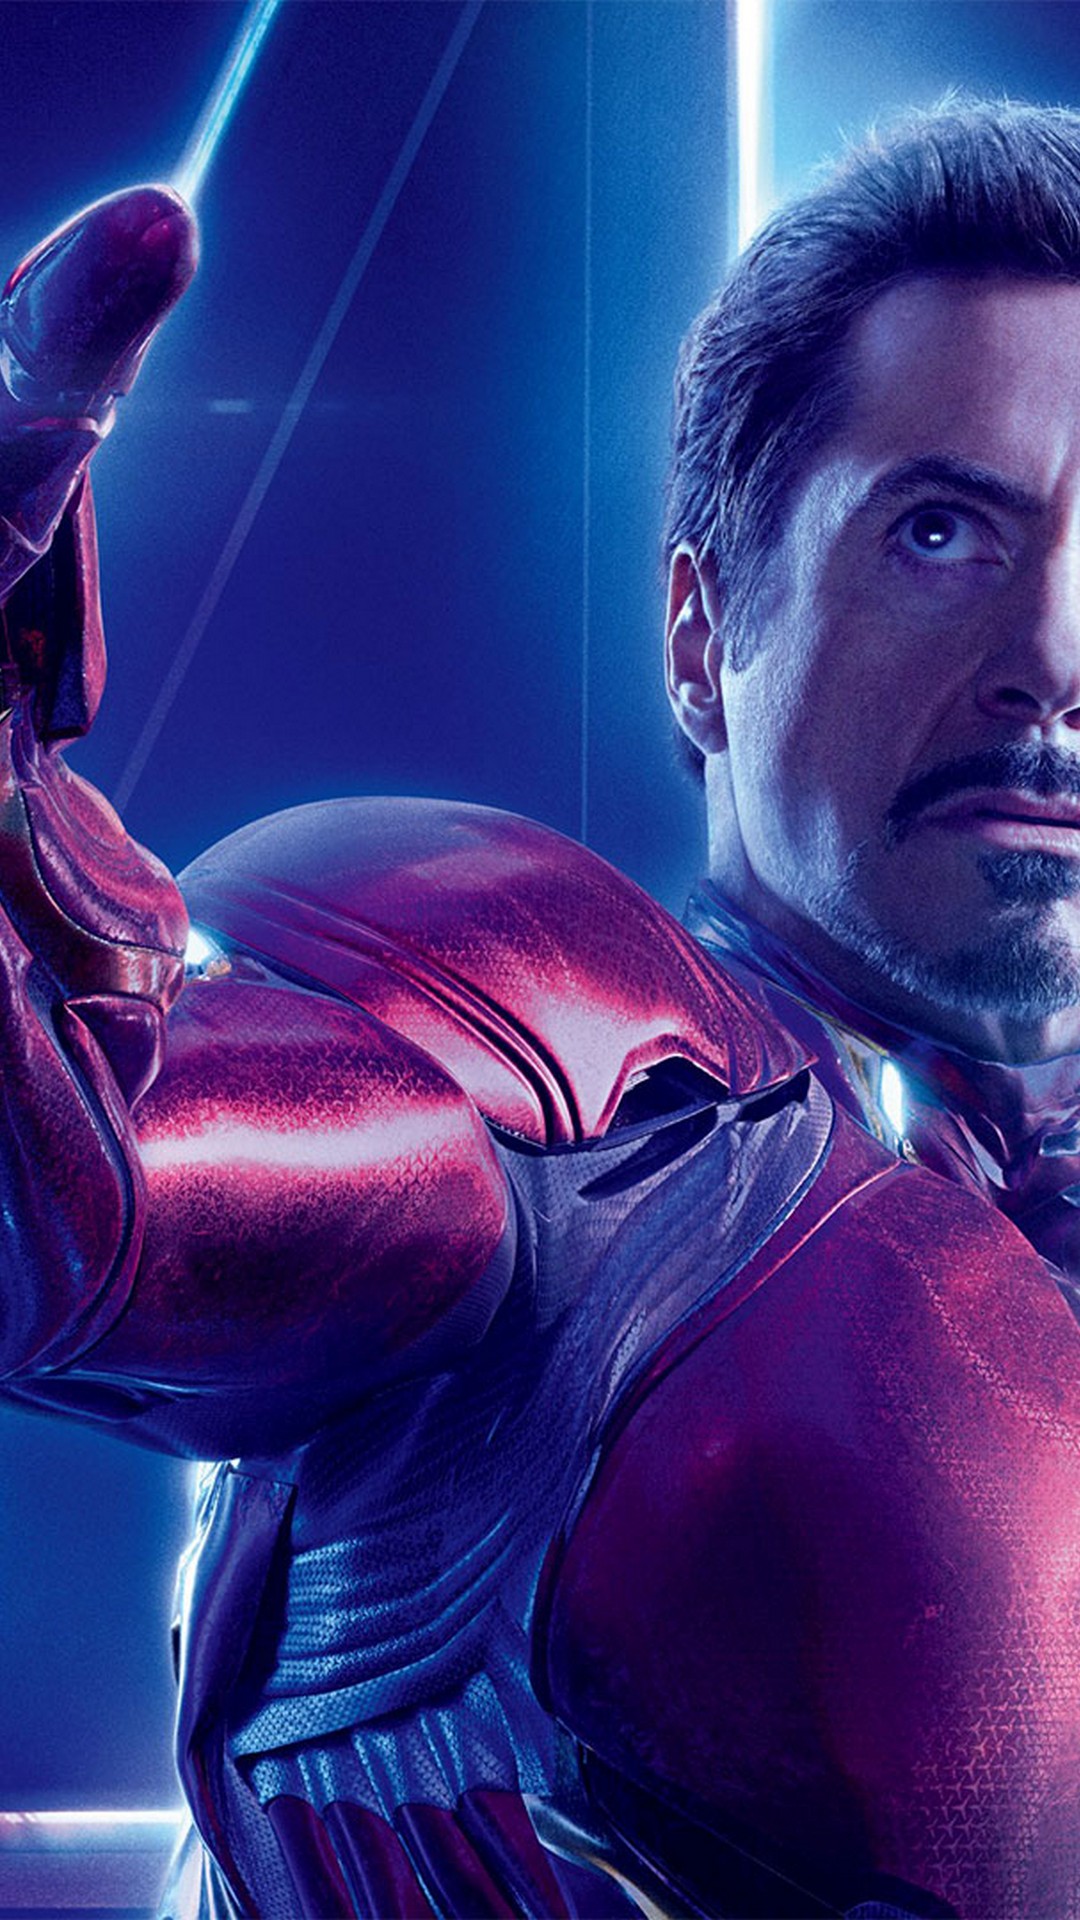 Iron Man Avengers Endgame iPhone Wallpaper With high-resolution 1080X1920 pixel. You can use this poster wallpaper for your Desktop Computers, Mac Screensavers, Windows Backgrounds, iPhone Wallpapers, Tablet or Android Lock screen and another Mobile device